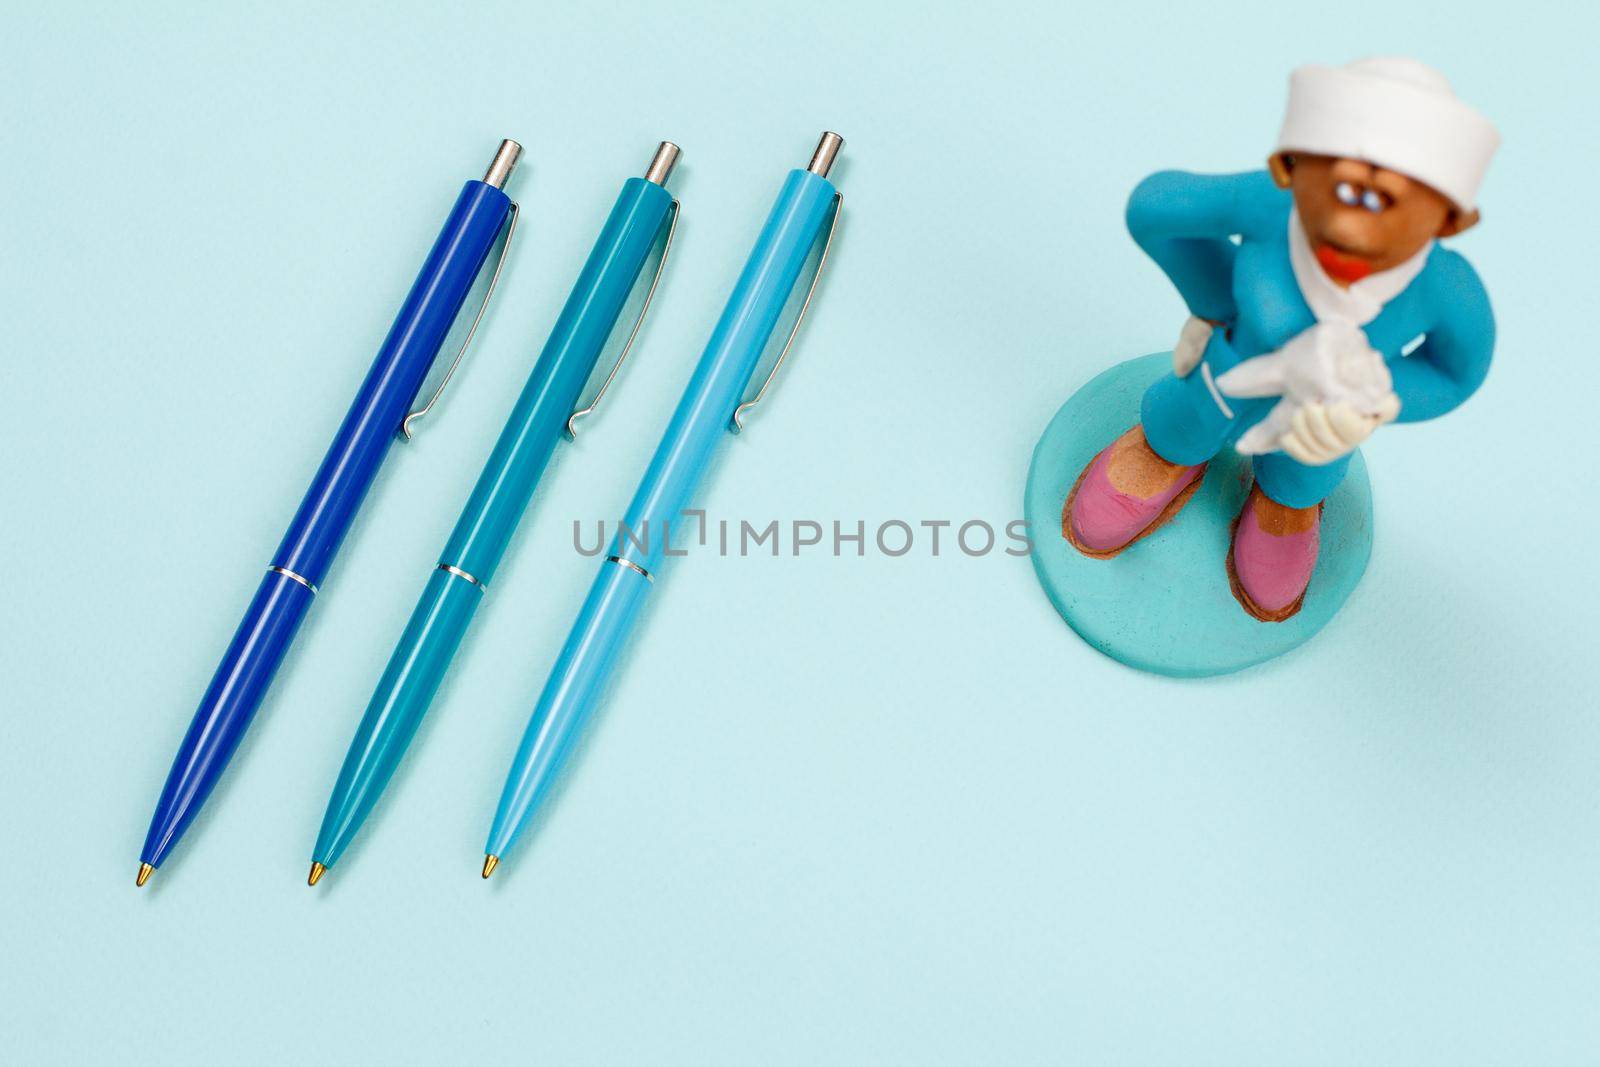 Three plastic pens on a blue background. by mvg6894